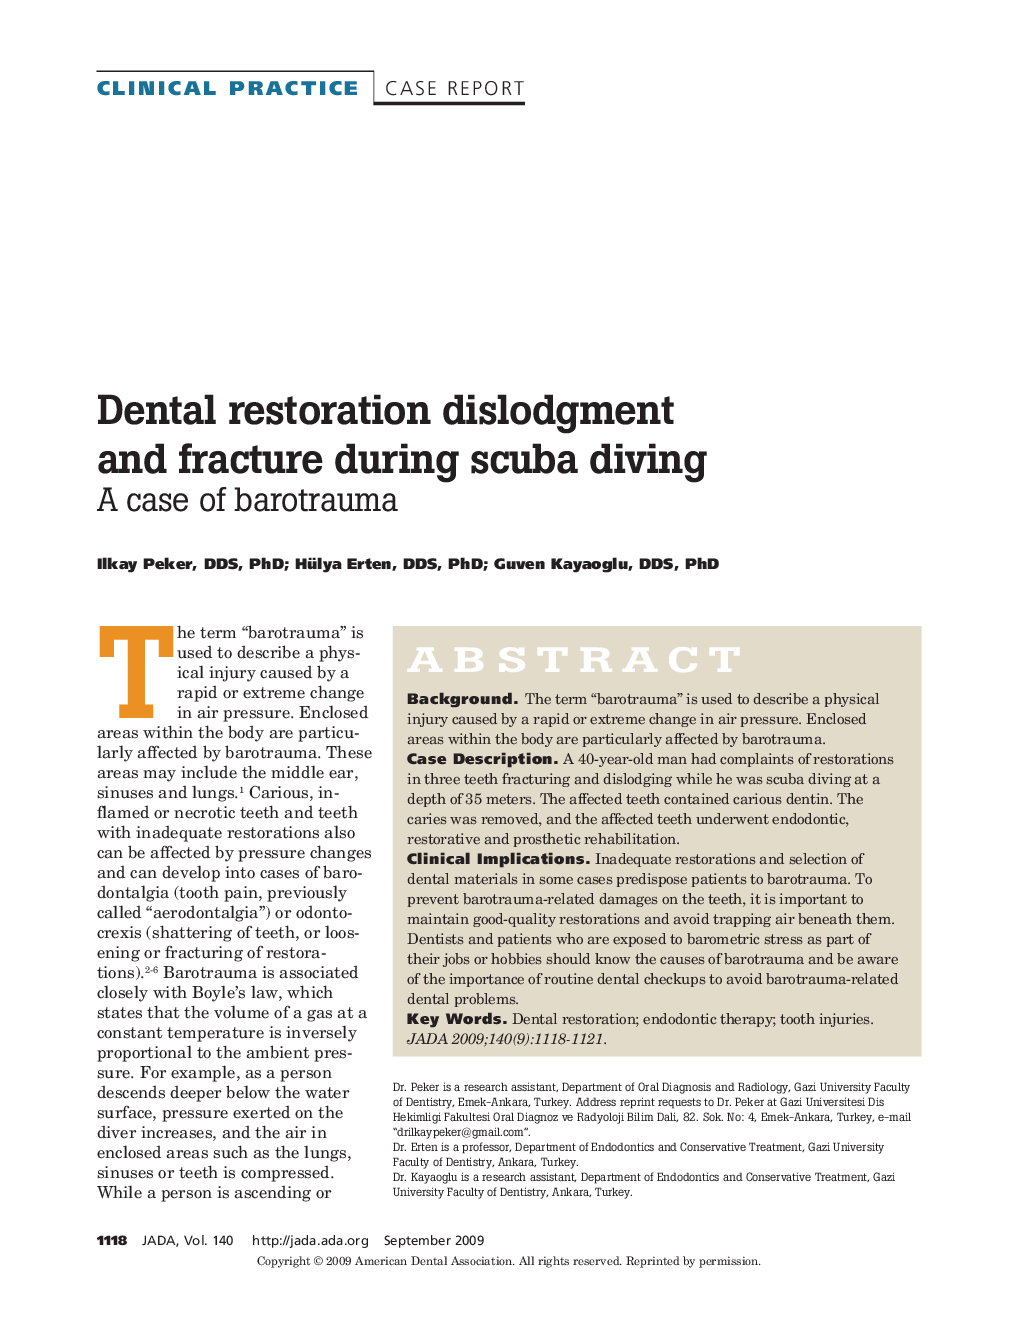 Dental Restoration Dislodgment and Fracture During Scuba Diving